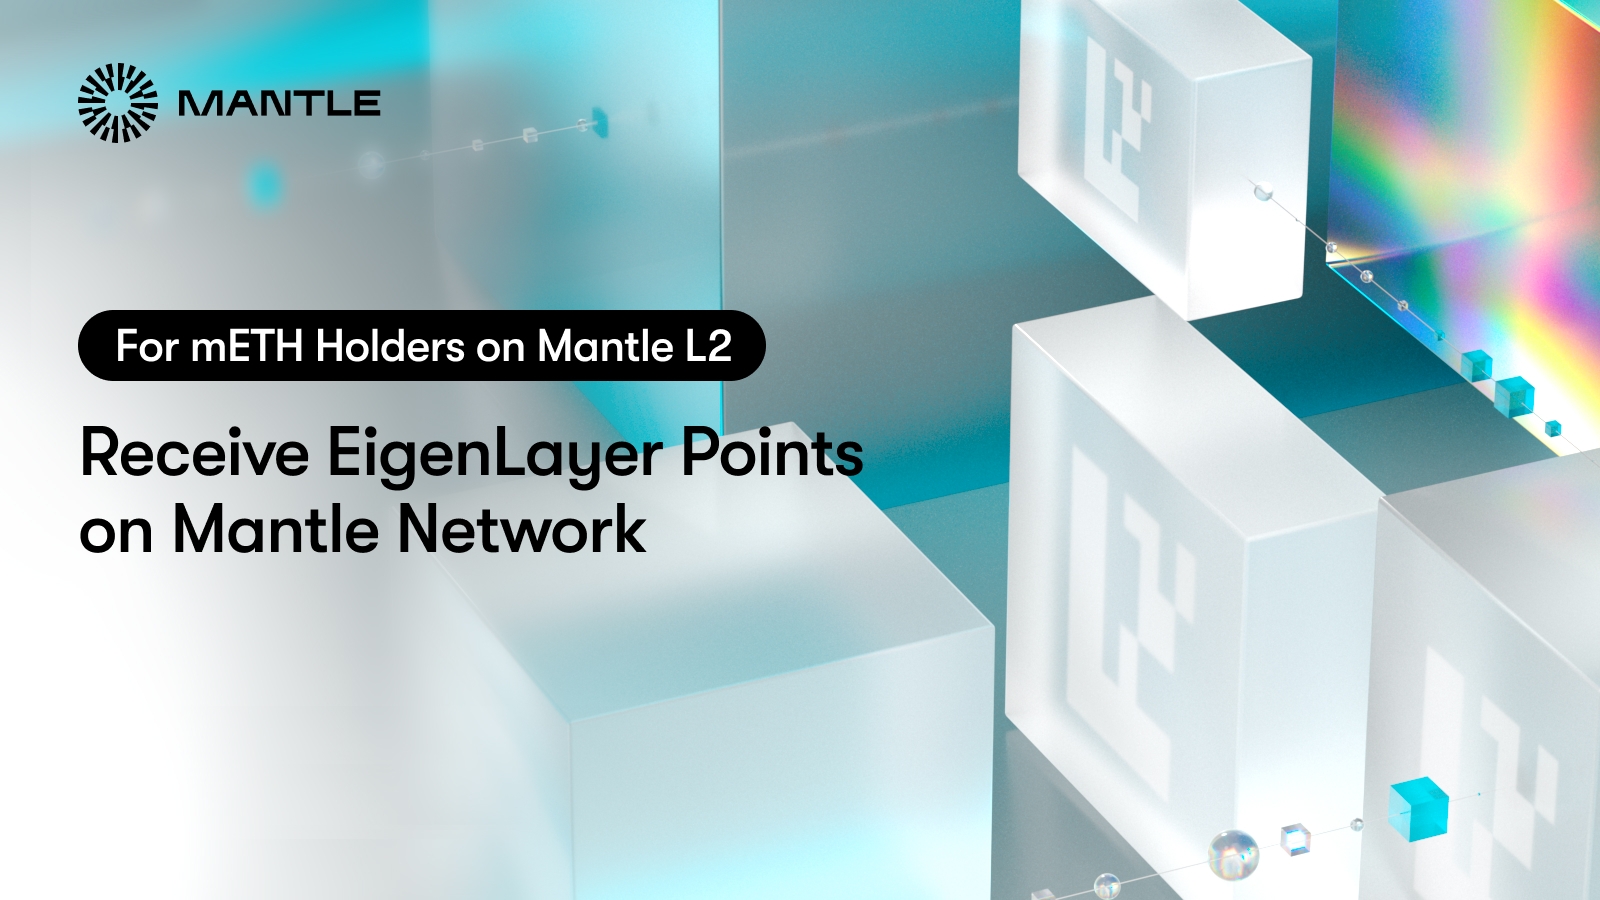 mETH Holder Advantage: Boost Your Rewards With Ongoing EigenLayer Points on Mantle Network